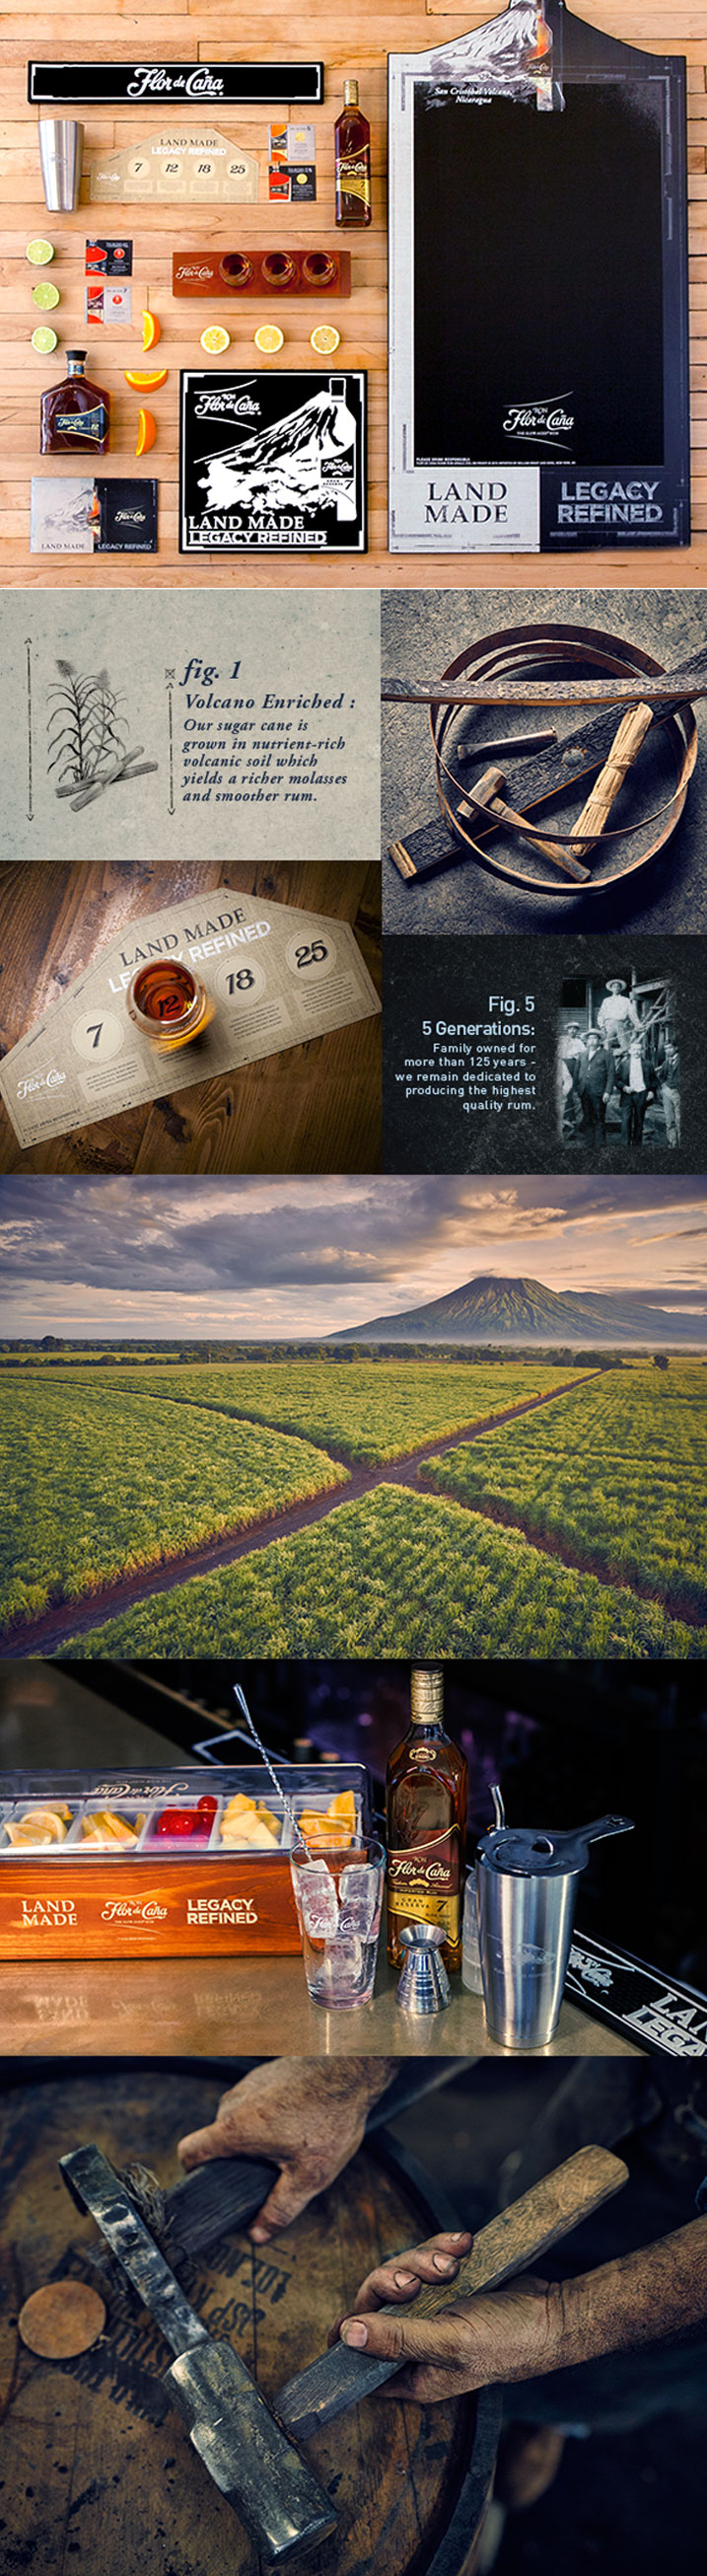 A collage of photos with a field and a mountain in the background.